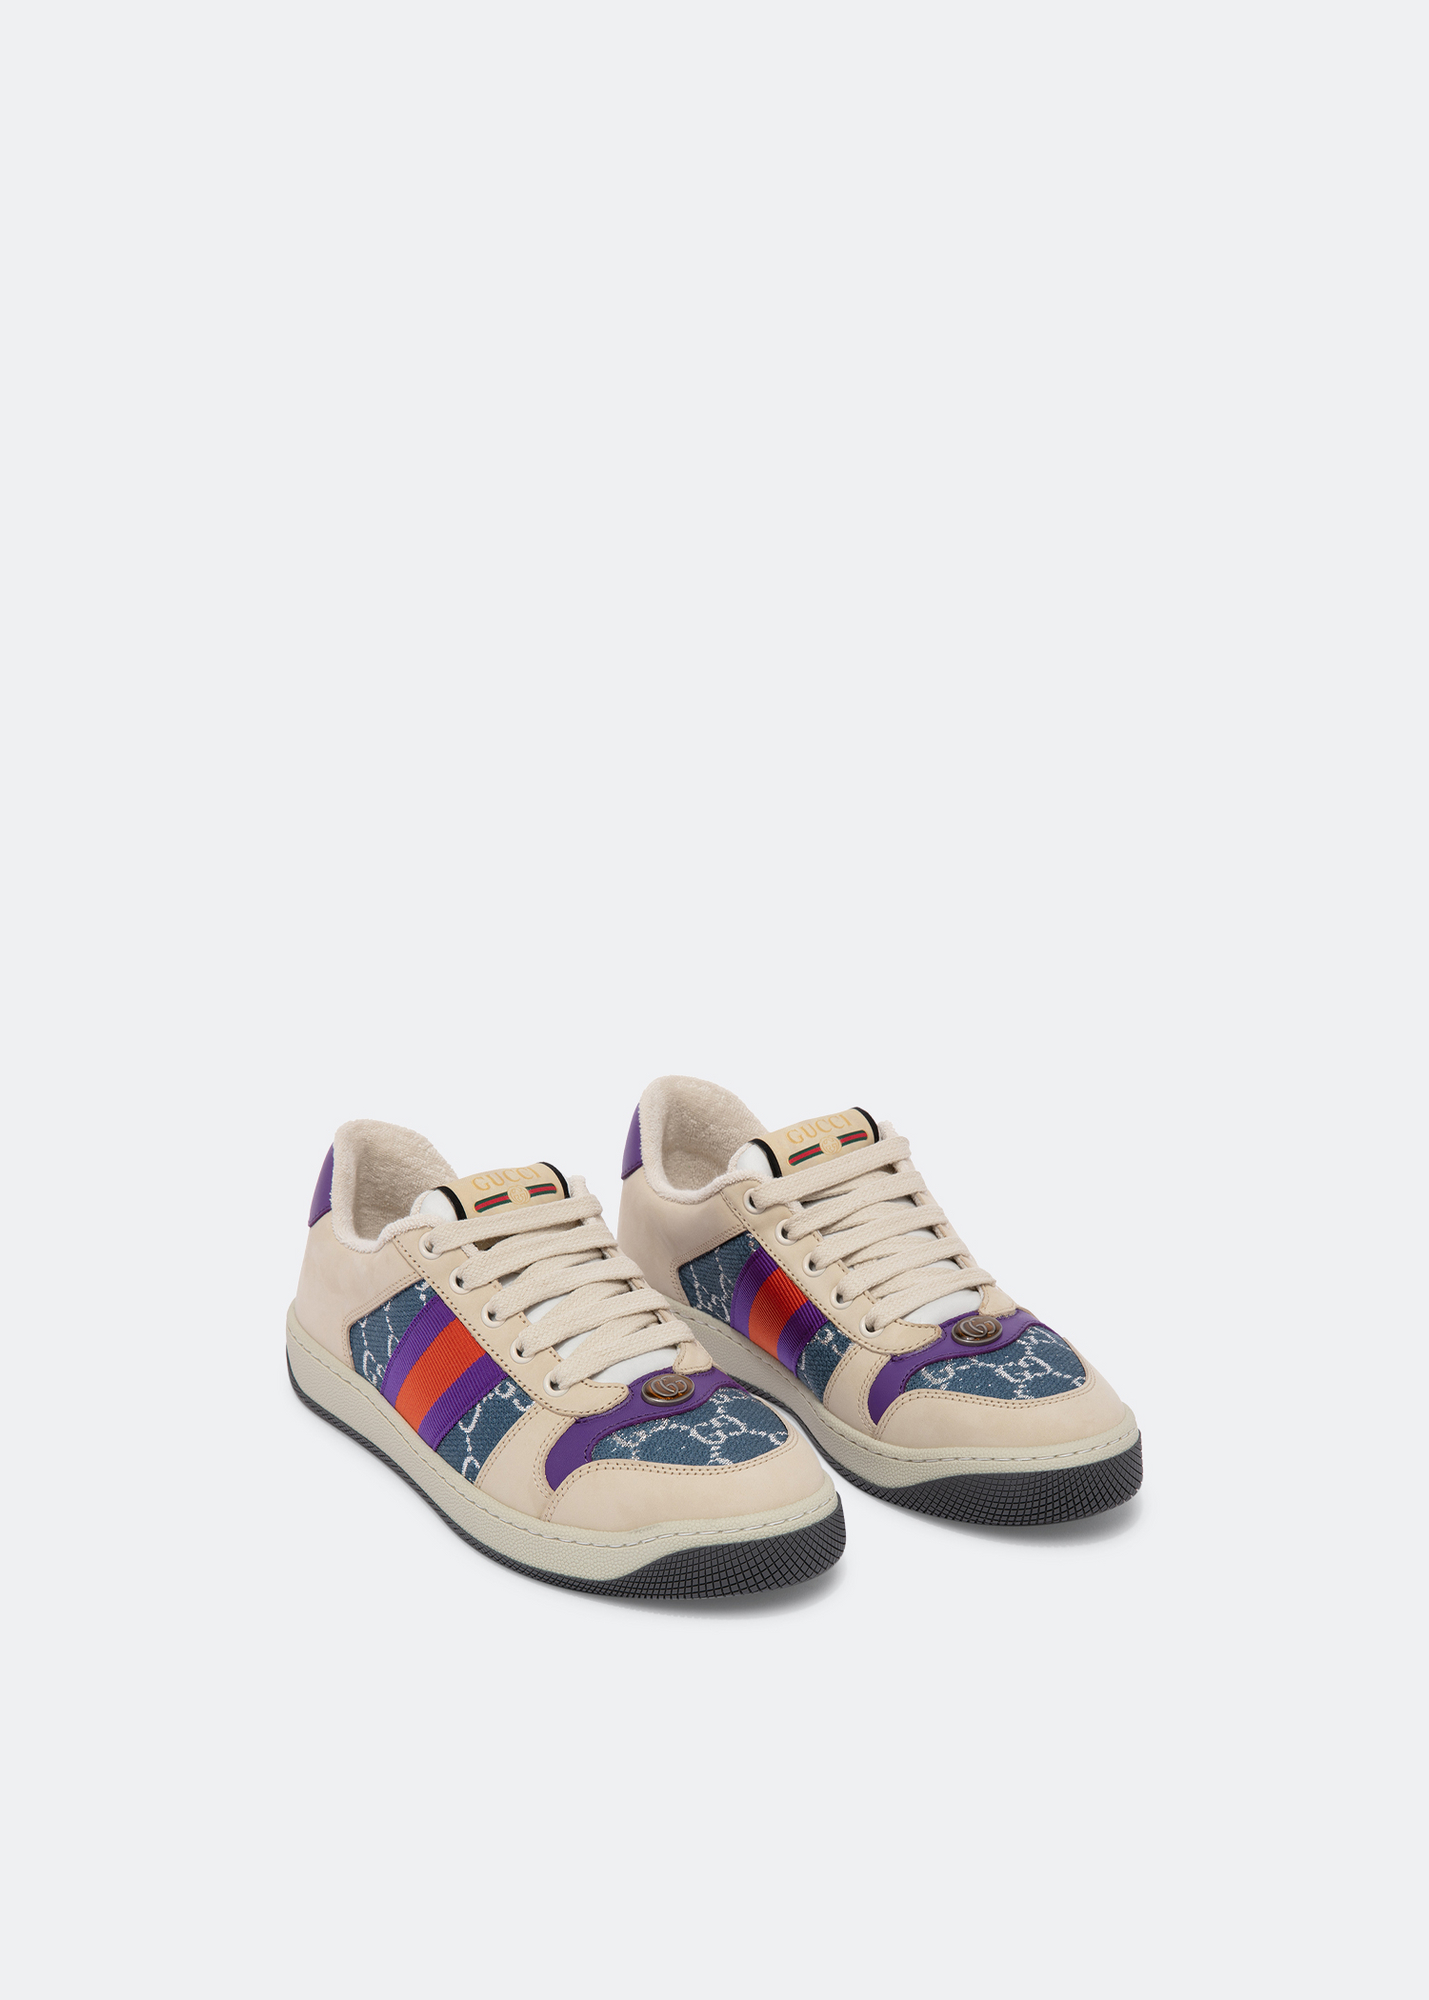 The Screener sneakers mix leather with a mini GG fabric, featuring